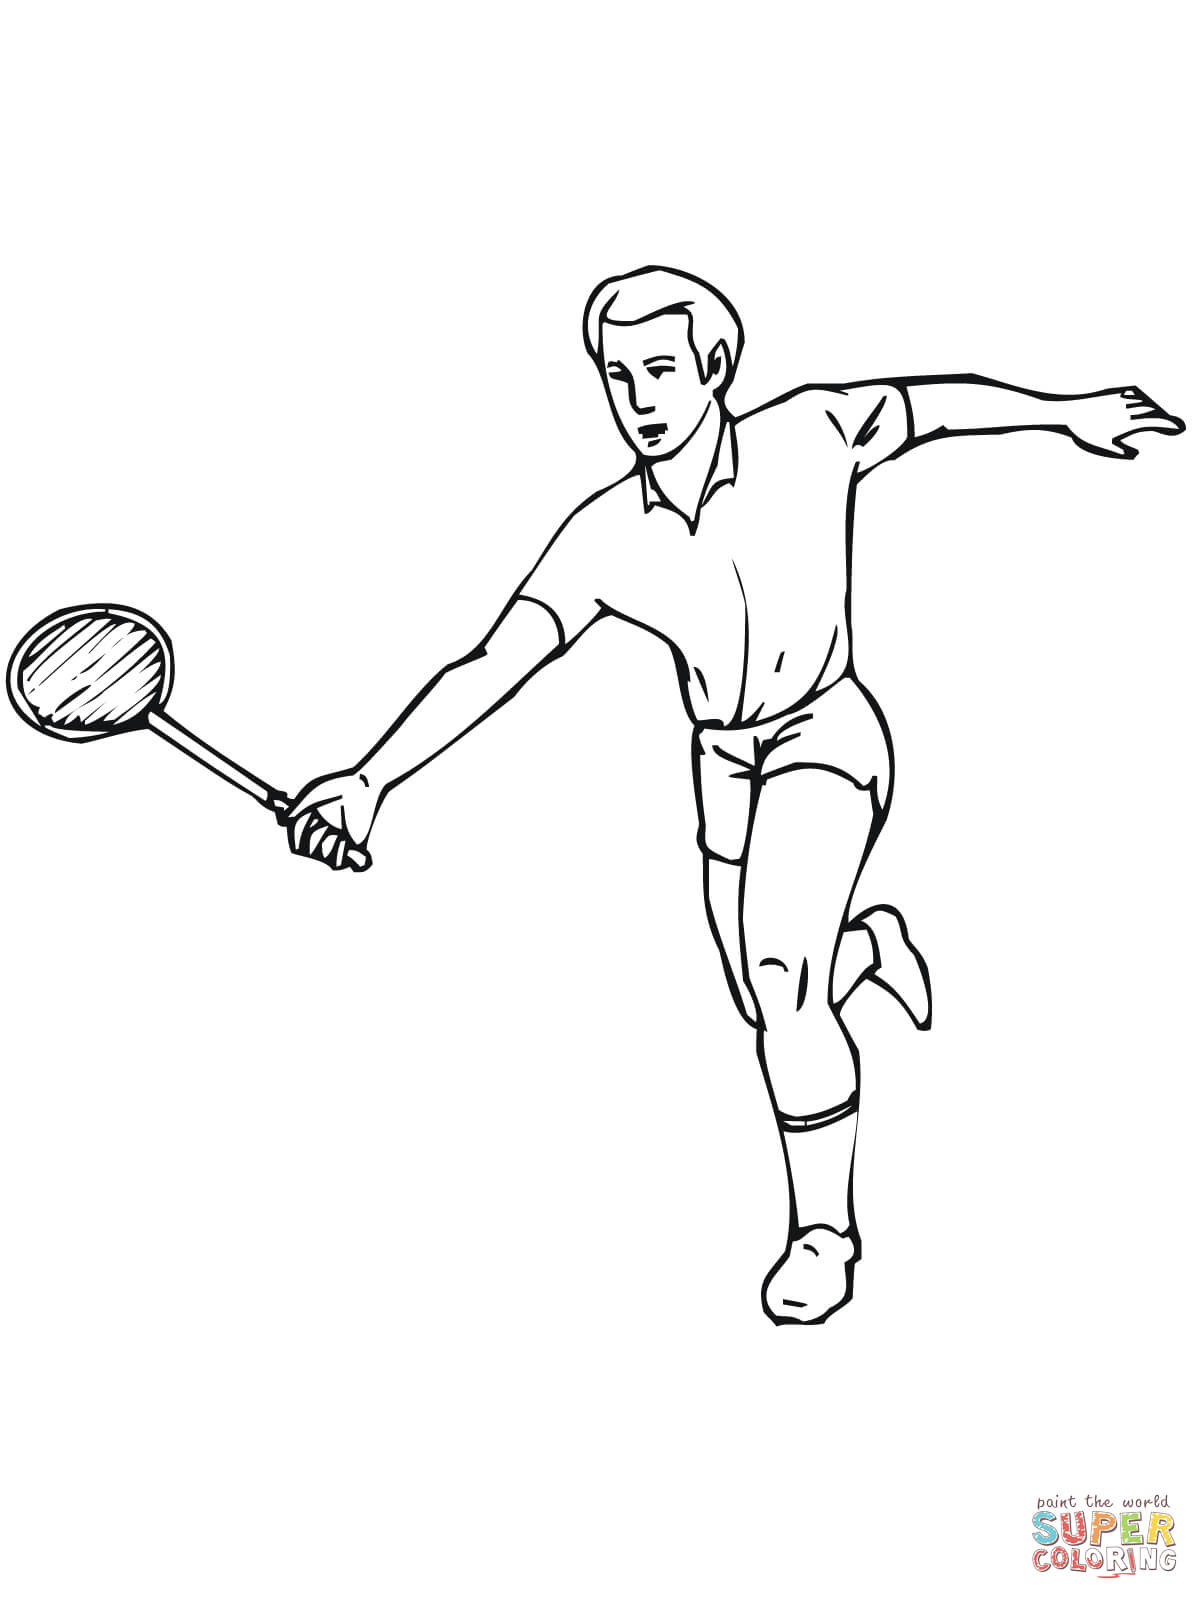 Coloring free printable pages. Badminton clipart colouring page